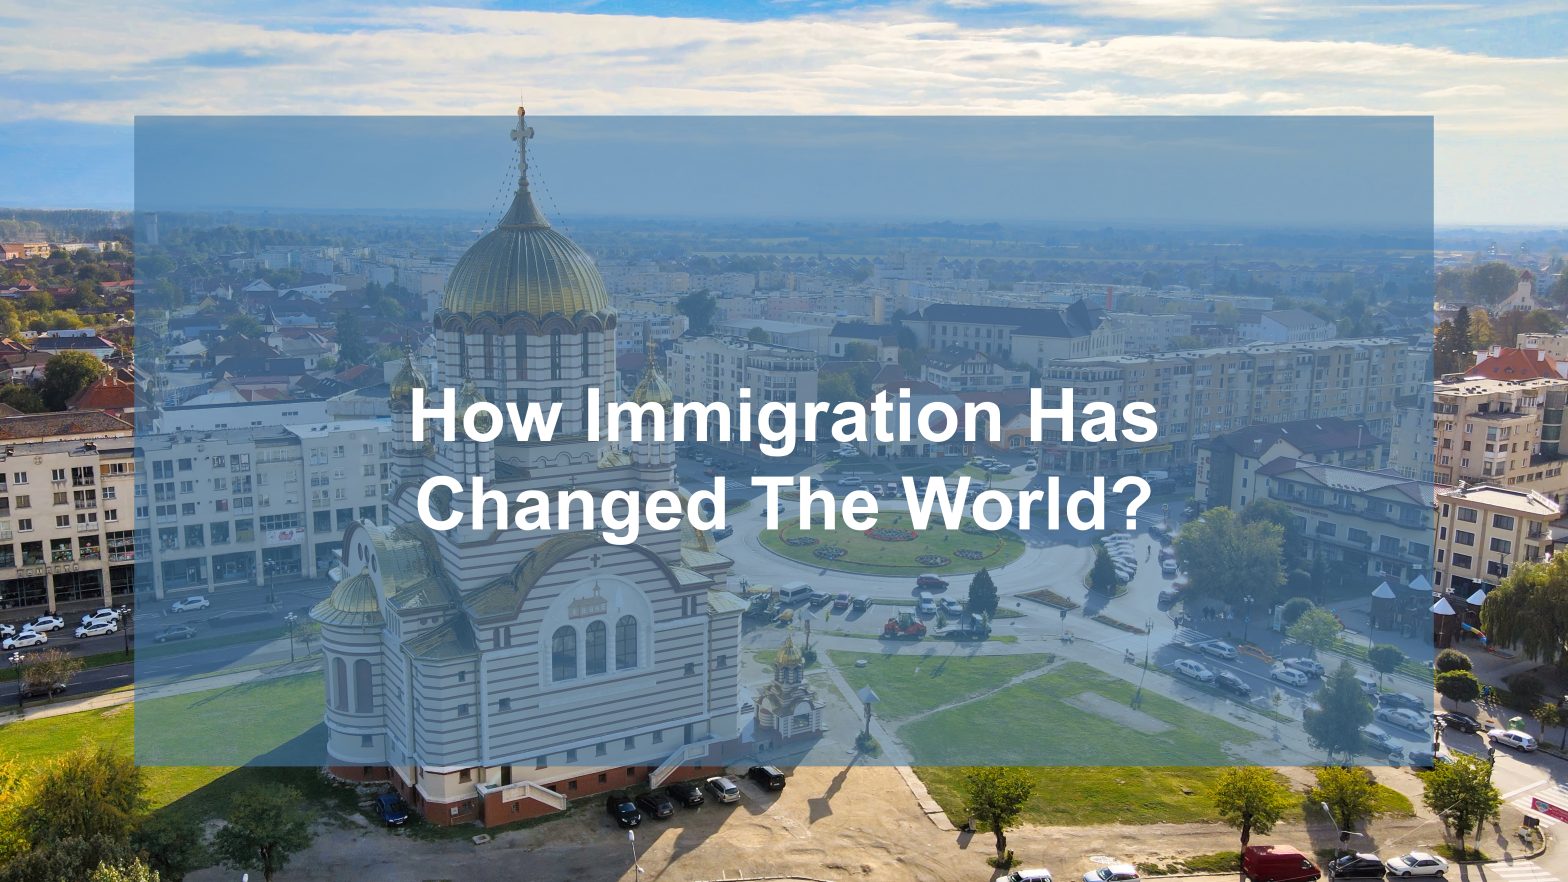 How Immigration Has Changed the World?